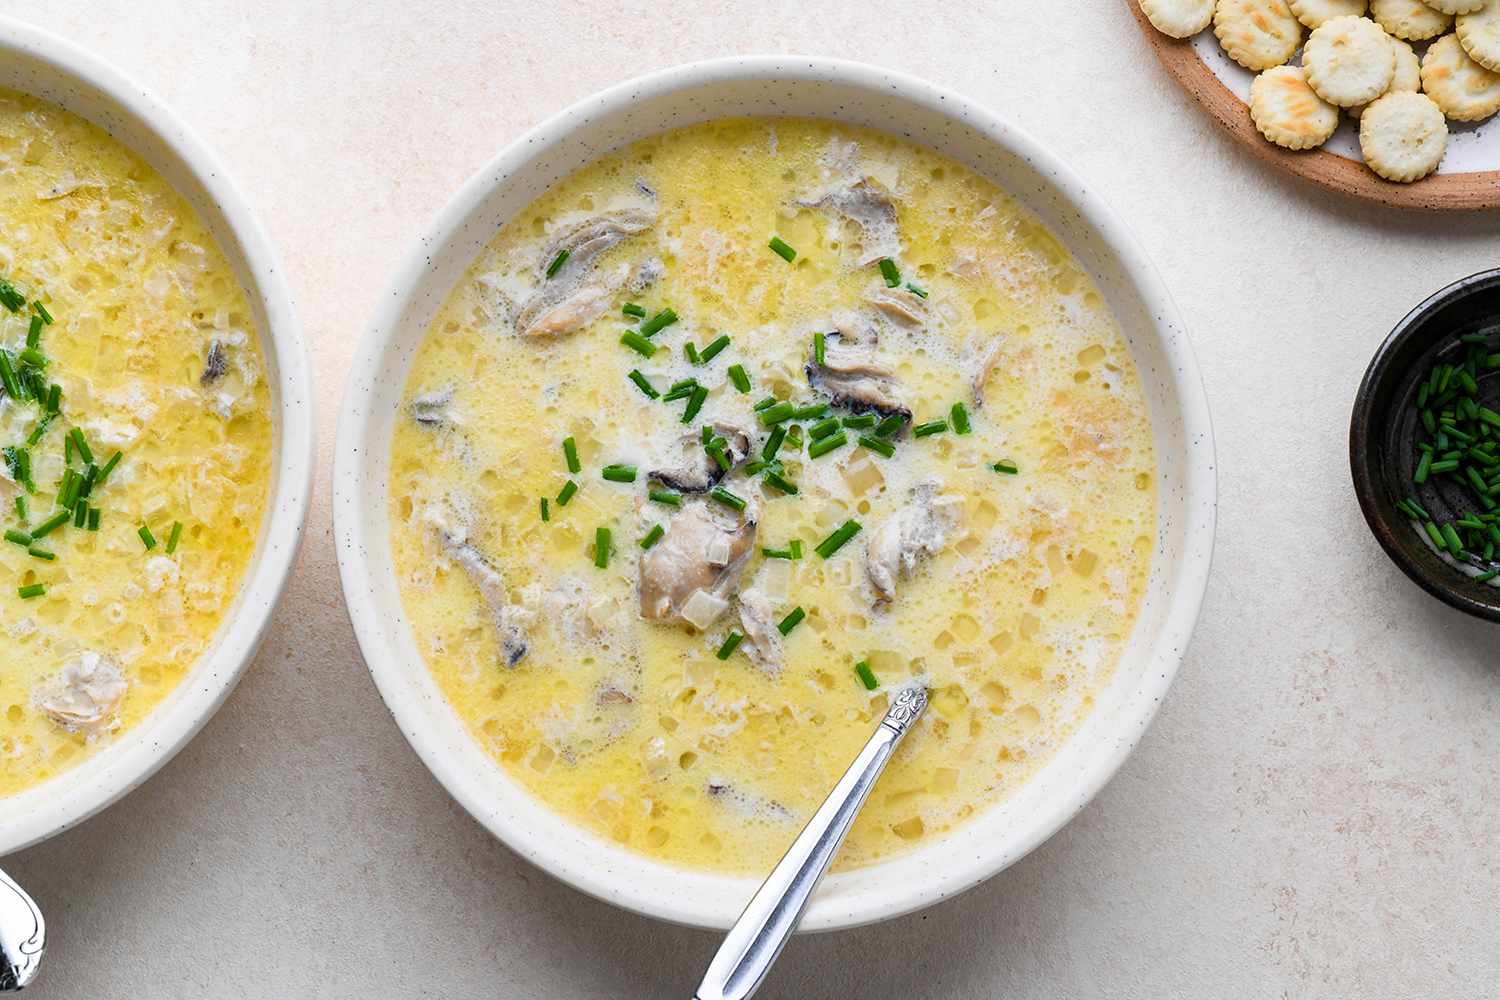 Oyster Stew Recipe With Canned Oysters